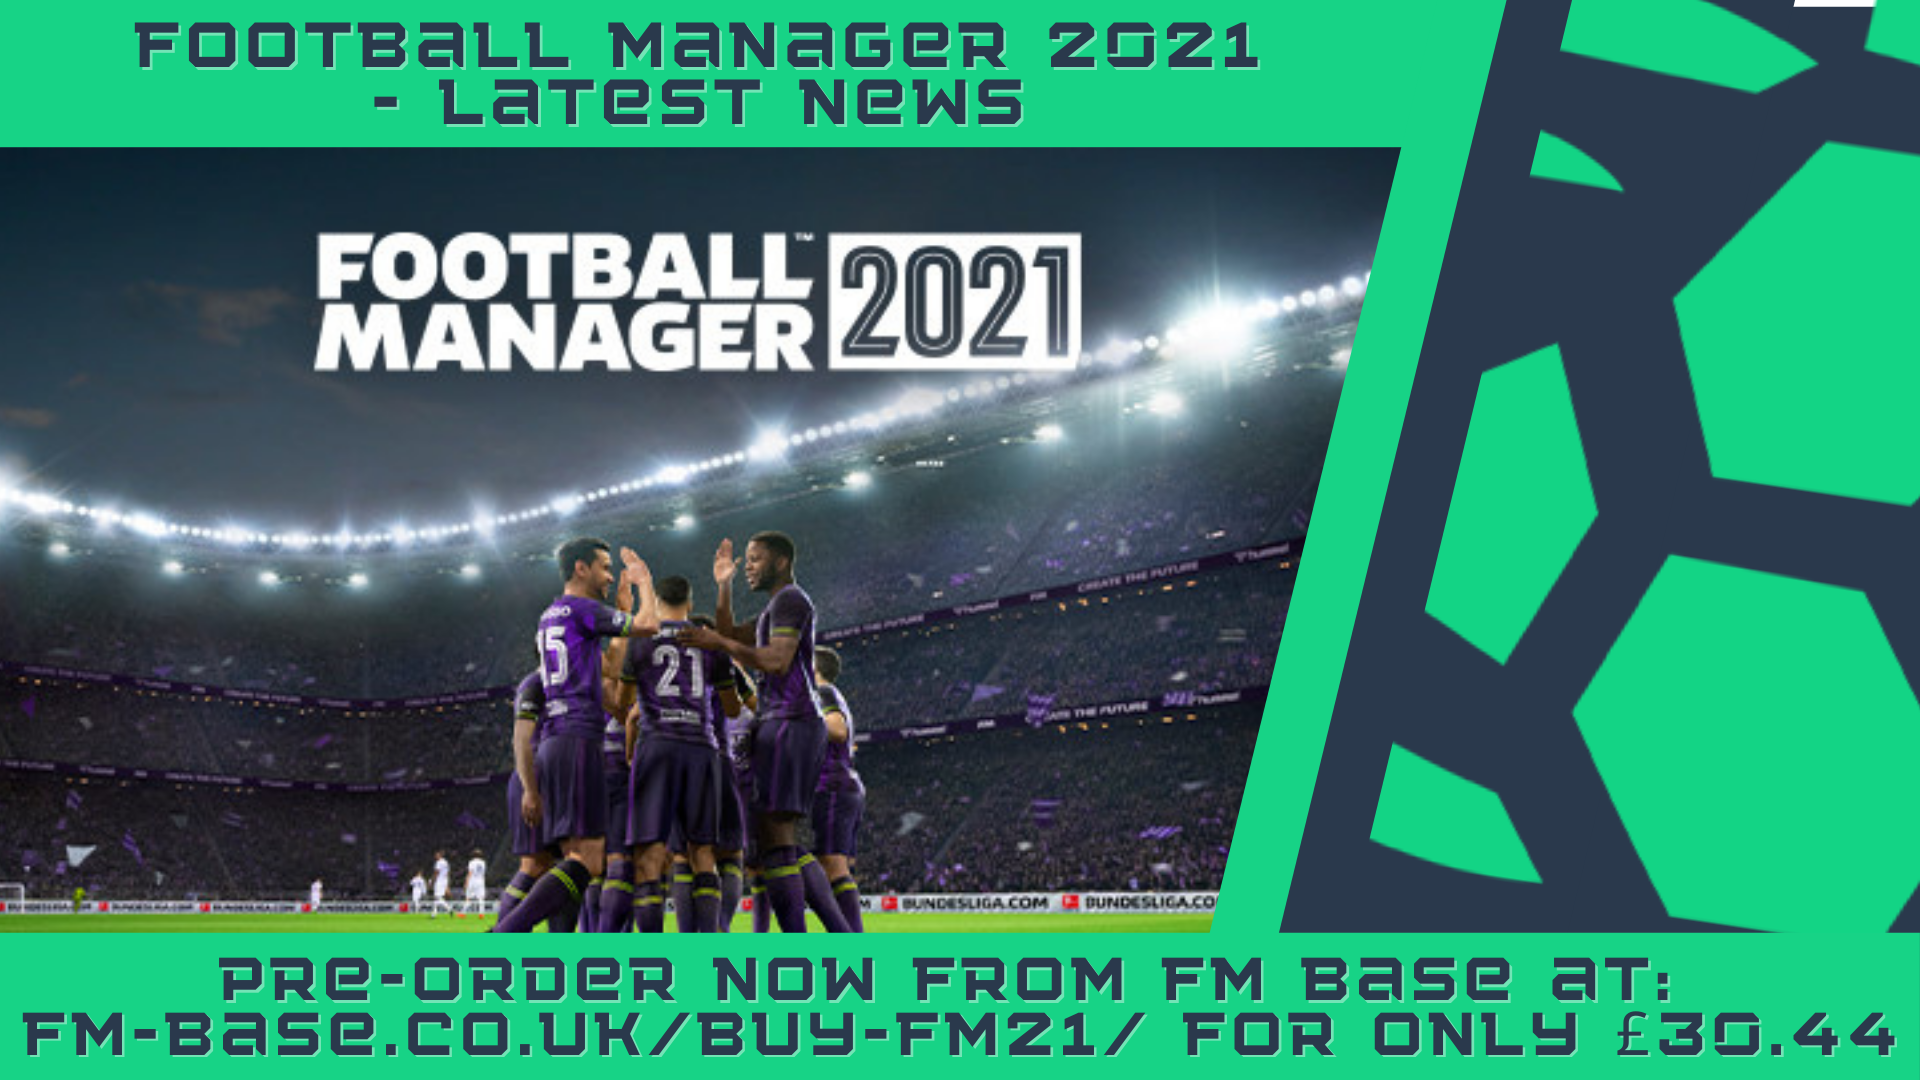 Football Manager 2021 - Latest News